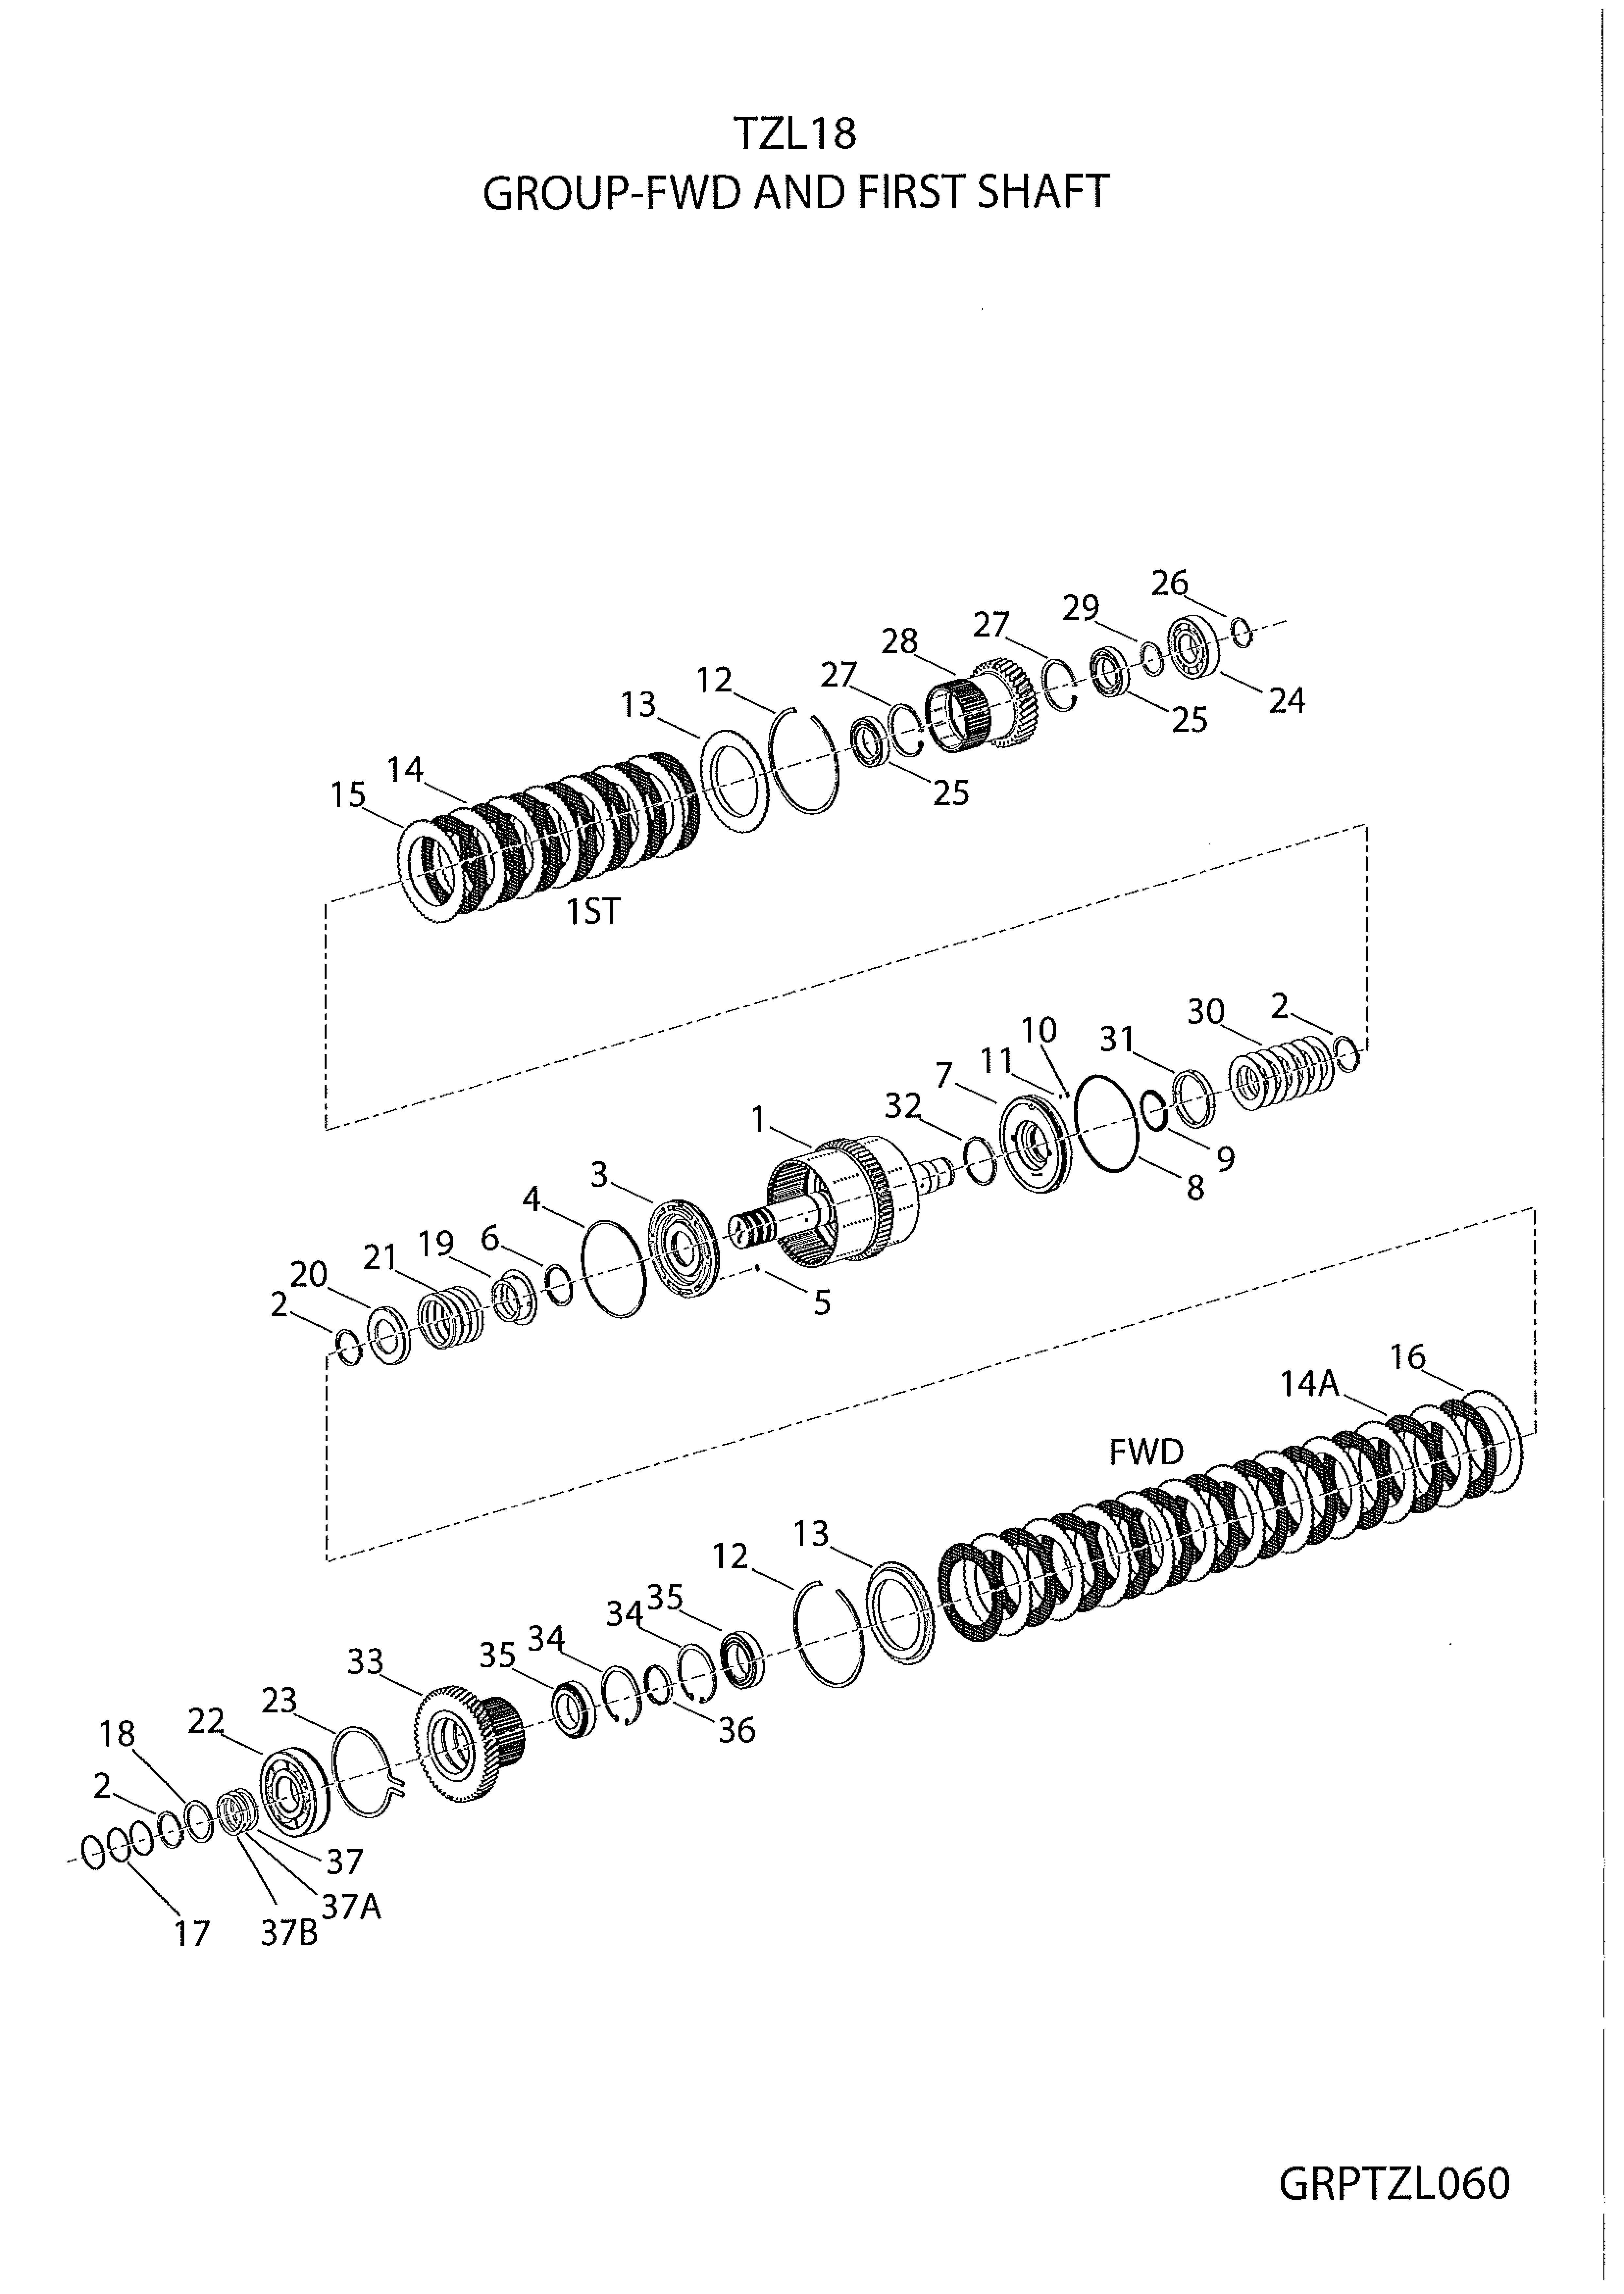 drawing for MILLER TECHNOLOGY 002515-001 - SEAL (figure 2)